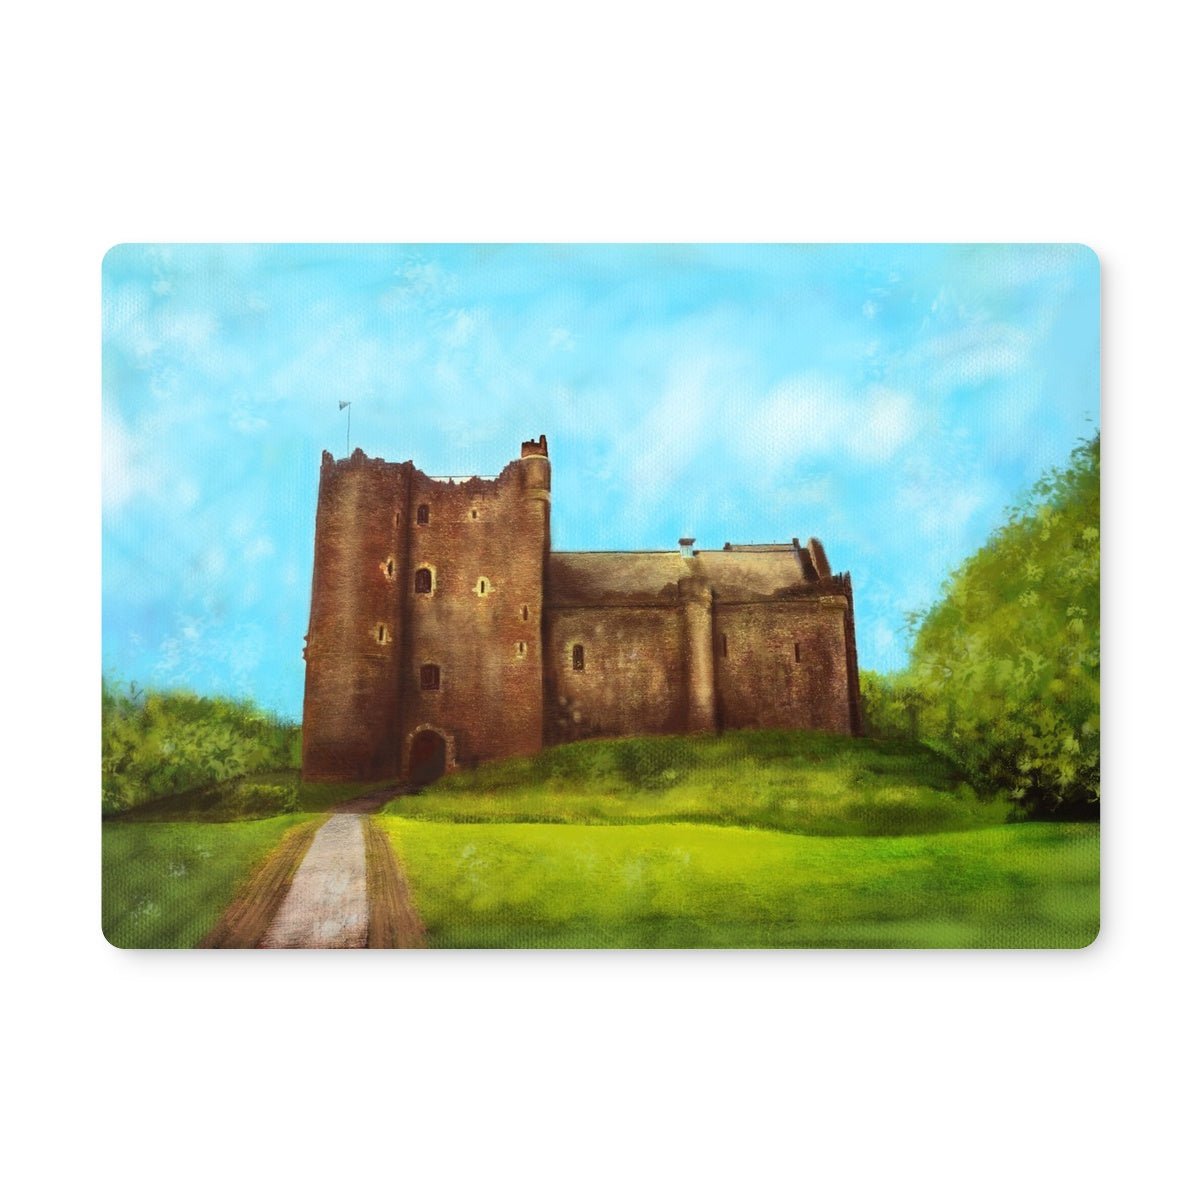 Doune Castle Art Gifts Placemat-Placemats-Historic & Iconic Scotland Art Gallery-2 Placemats-Paintings, Prints, Homeware, Art Gifts From Scotland By Scottish Artist Kevin Hunter